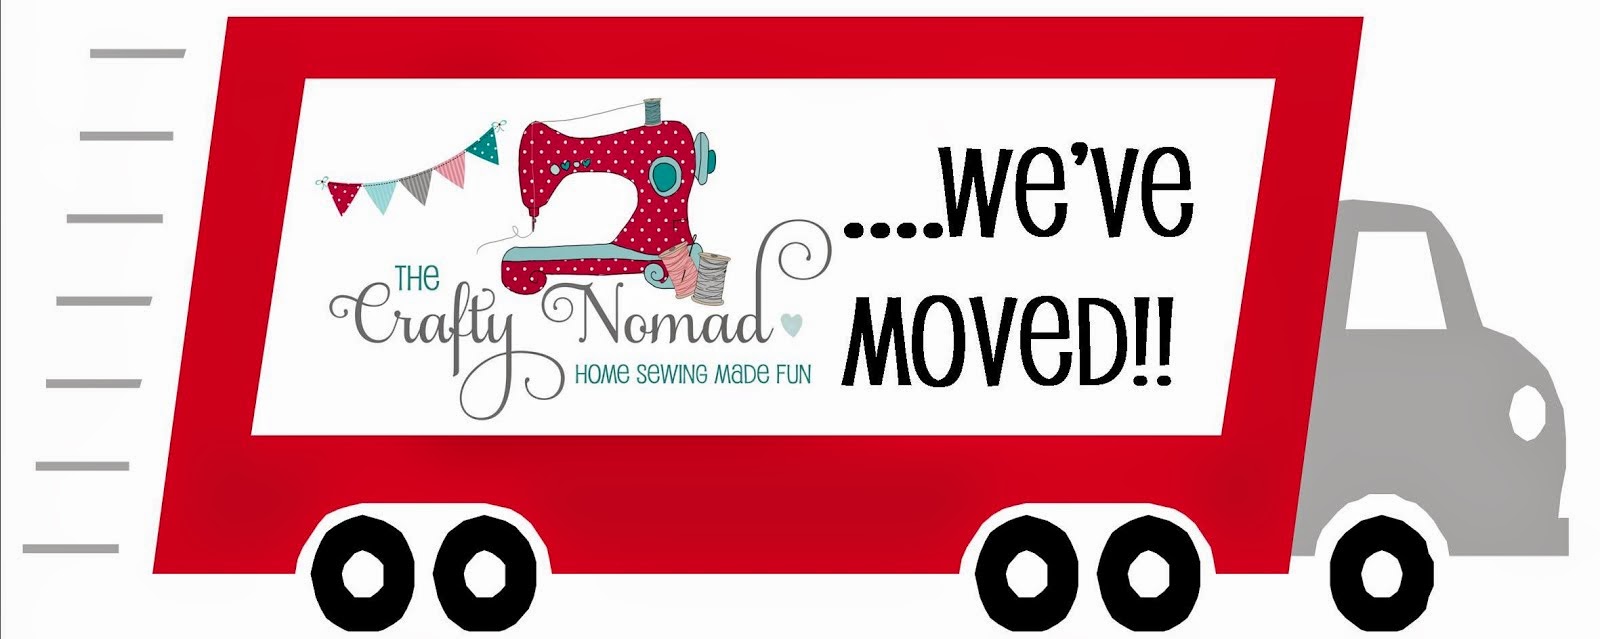 The Crafty Nomad Has Moved